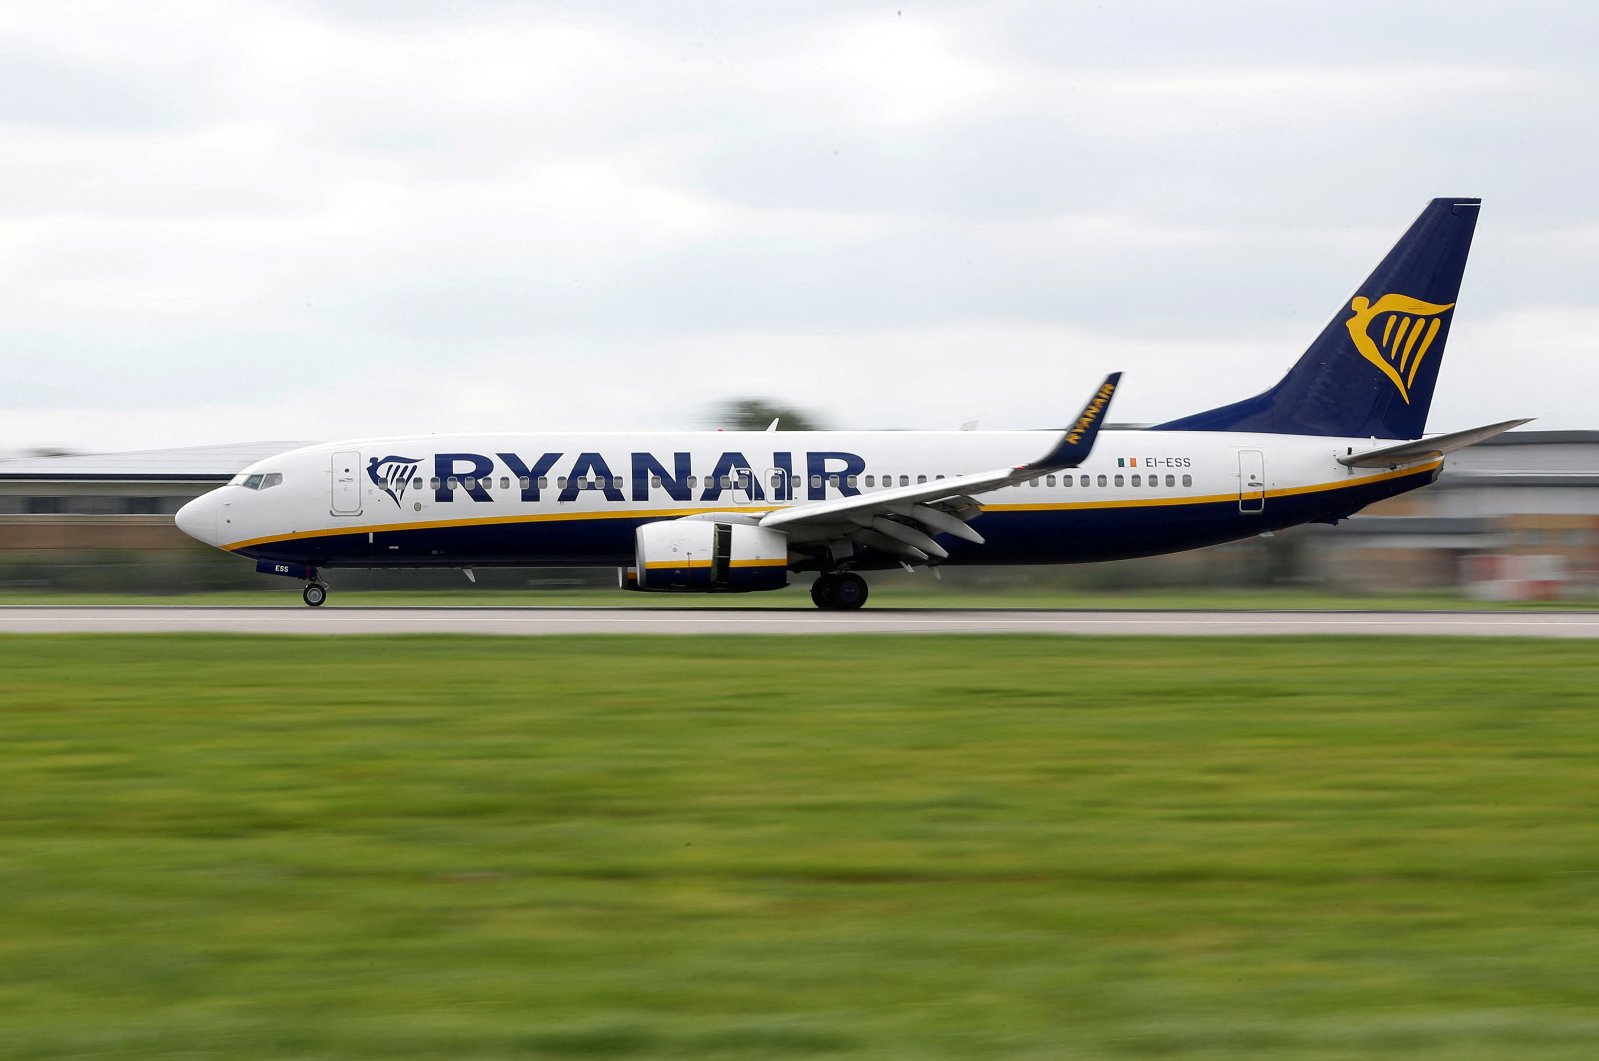 A Ryanair aircraft lands on the southern runway at Gatwick Airport in Crawley, Britain, Aug. 25, 2021. (Reuters Photo)